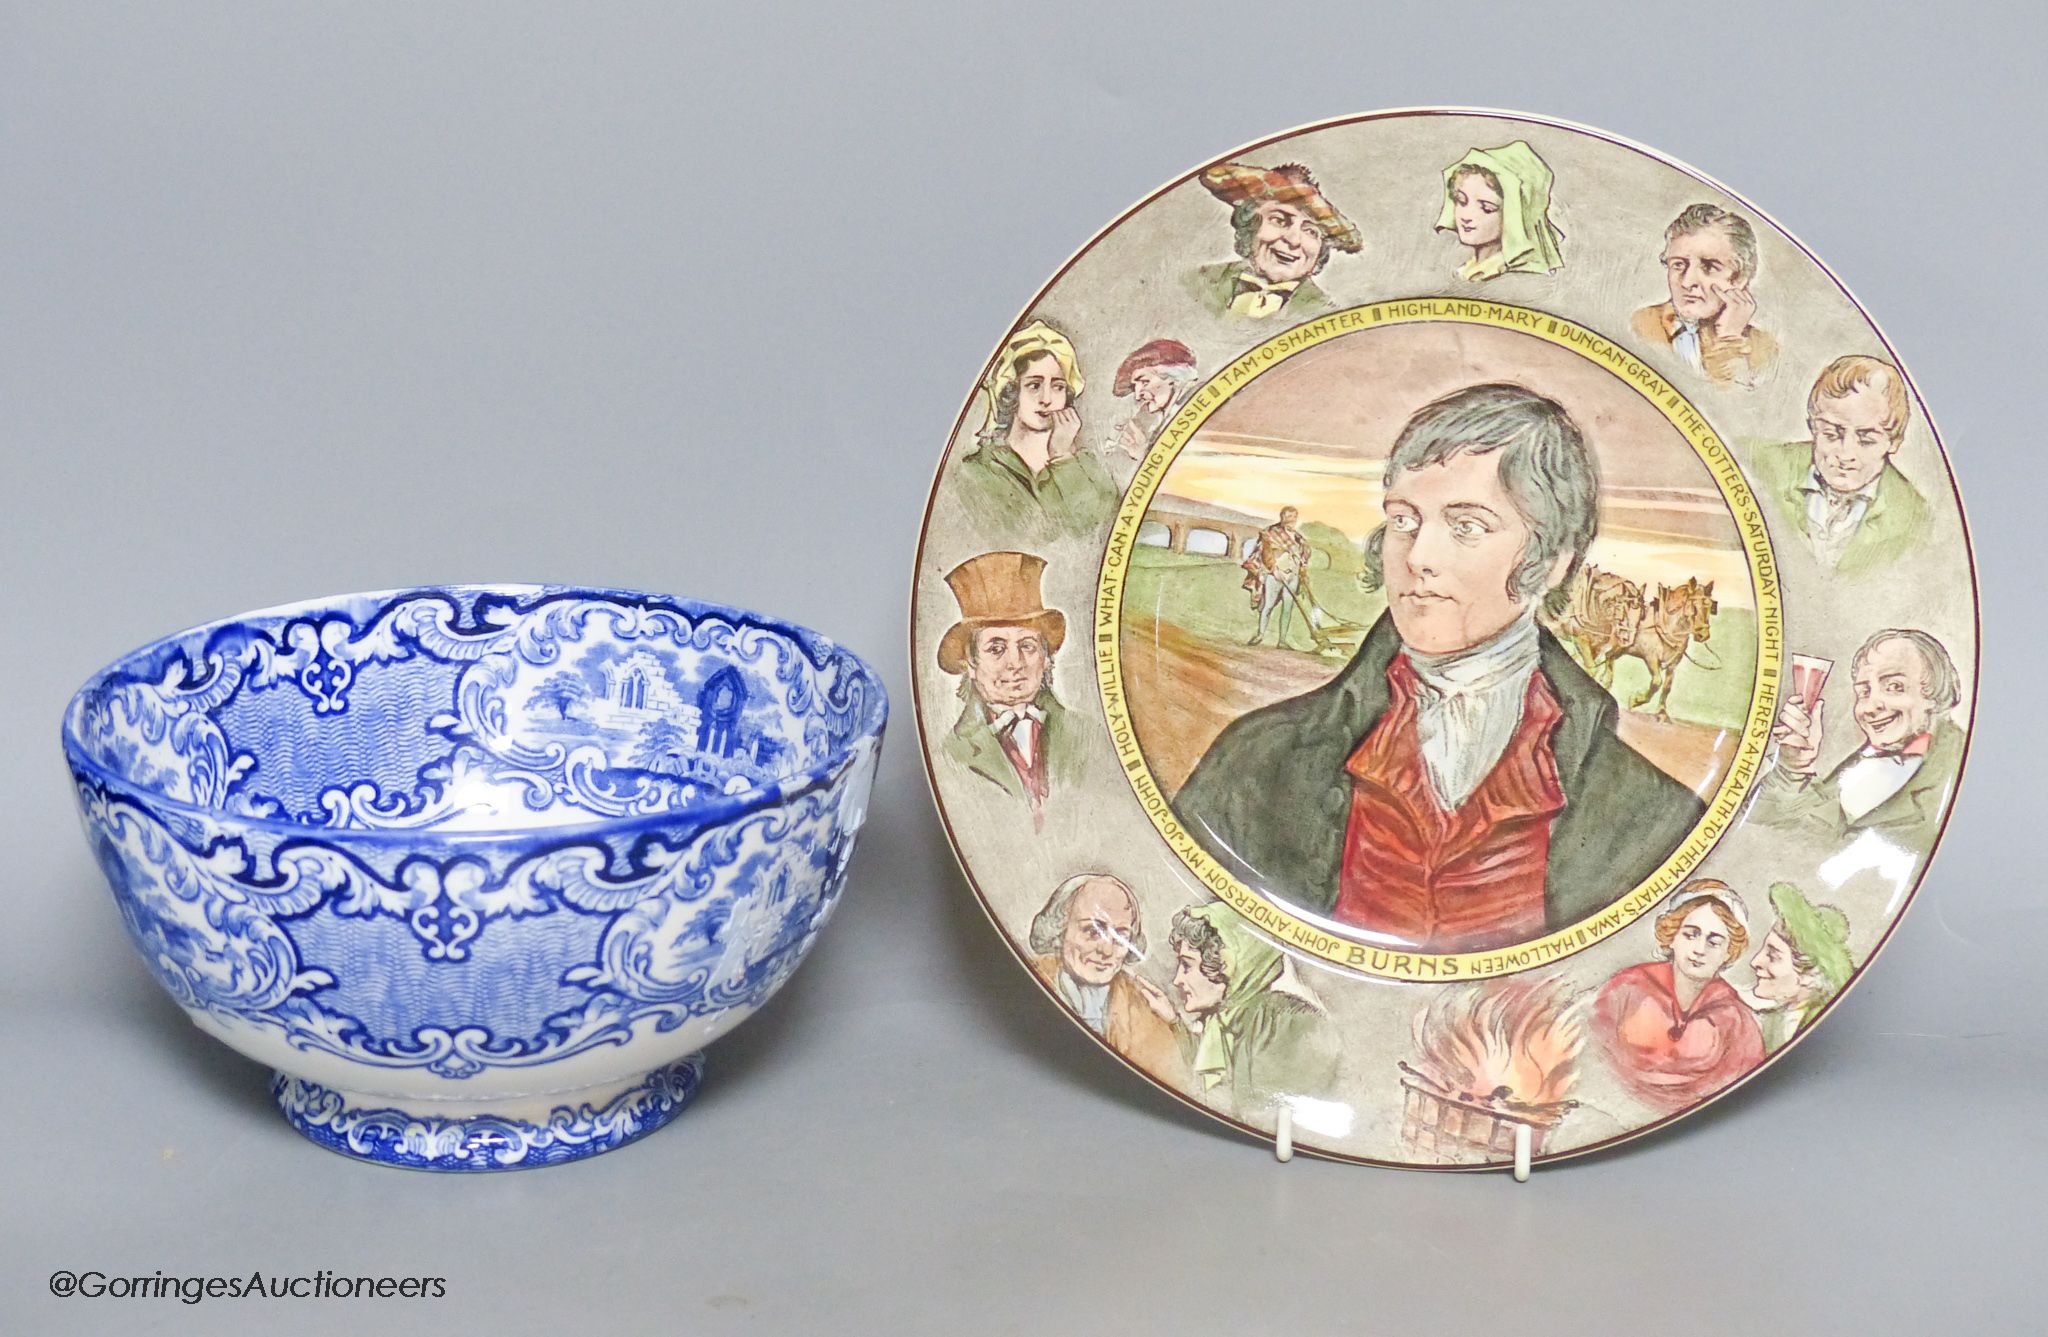 A Royal Doulton 'Burns' plate, no.D6344, diameter 26cm, and a George Jones & Sons Abbey pattern blue and white bowl